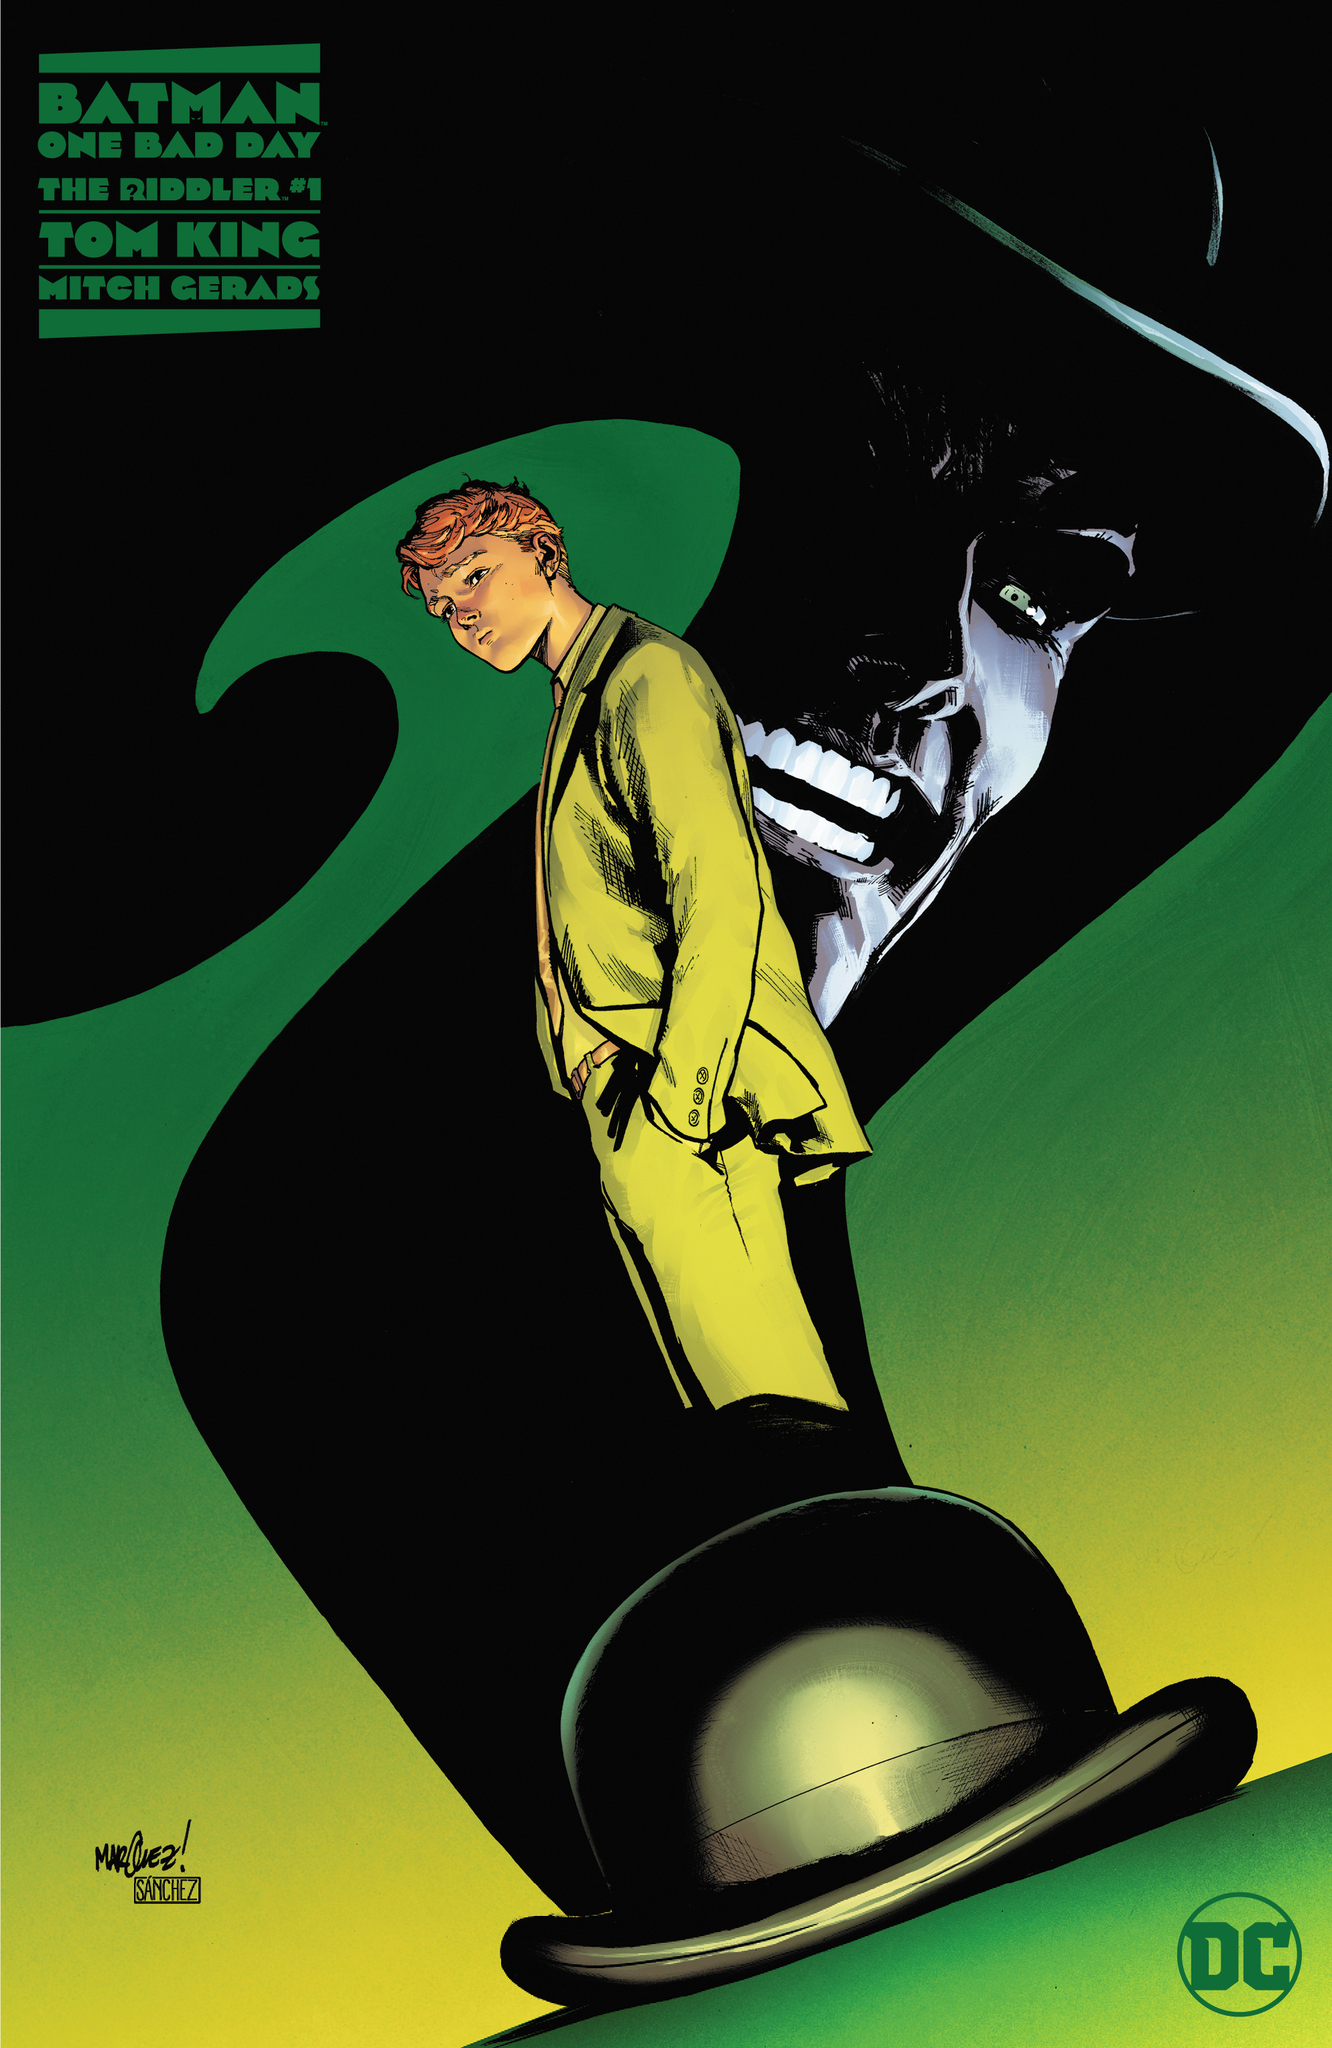 Batman One Bad Day The Riddler #1 (One Shot) Cover C 1 For 25 Incentive David Marquez Variant